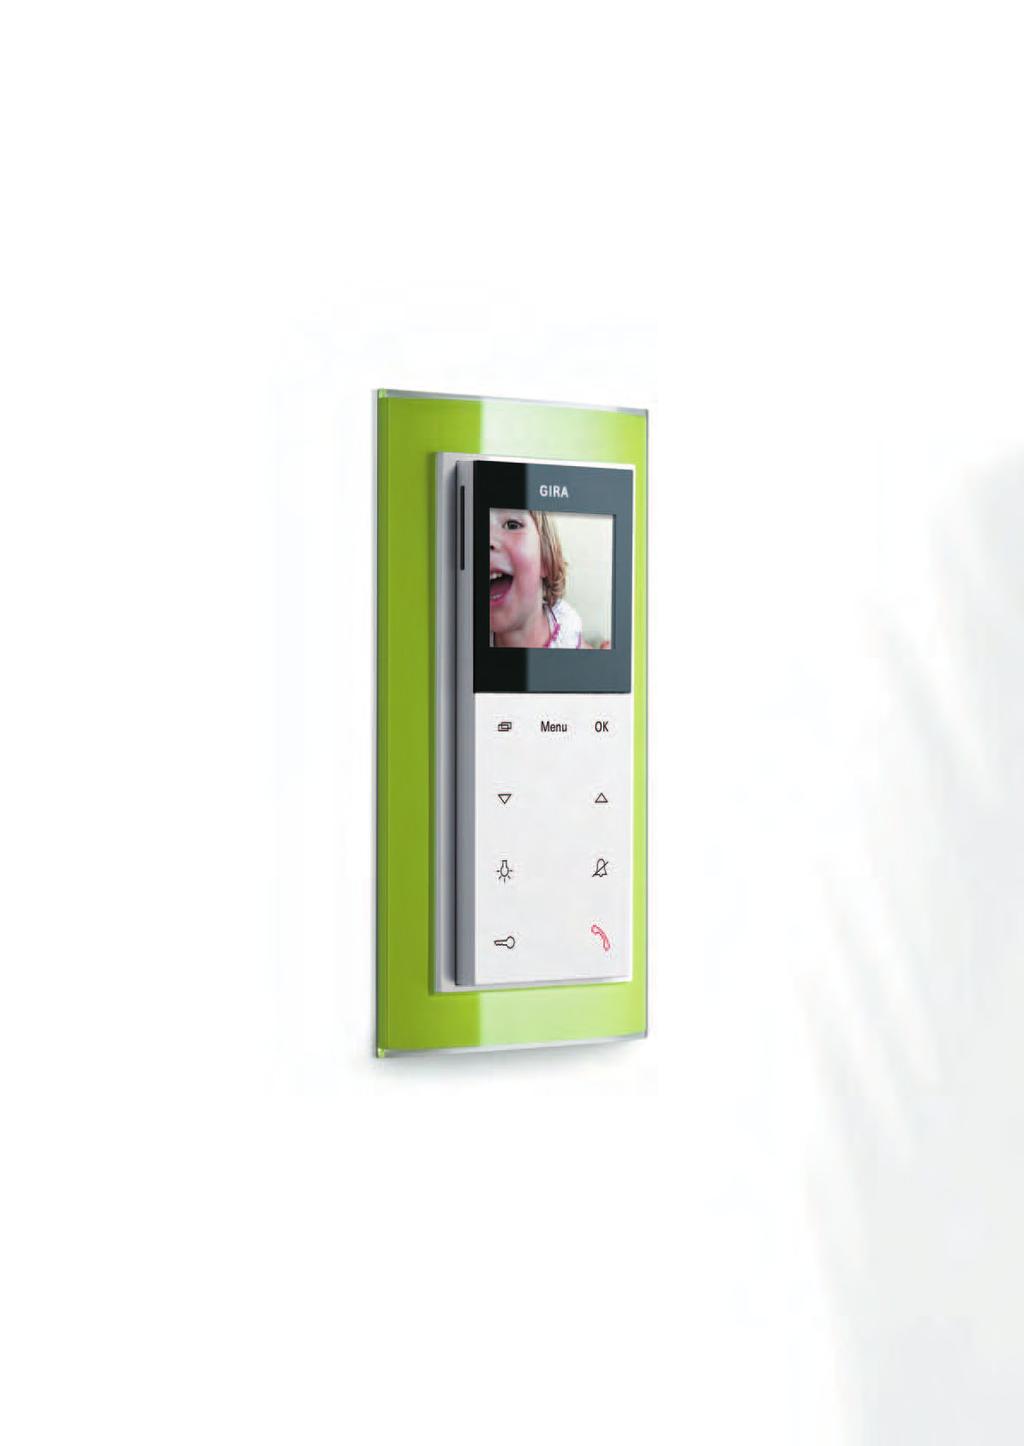 Gira surface-mounted home station video, Gira Event Clear green / pure white 55 127 21 mm. Compact and elegant as never before, in a two-gang cover frame.